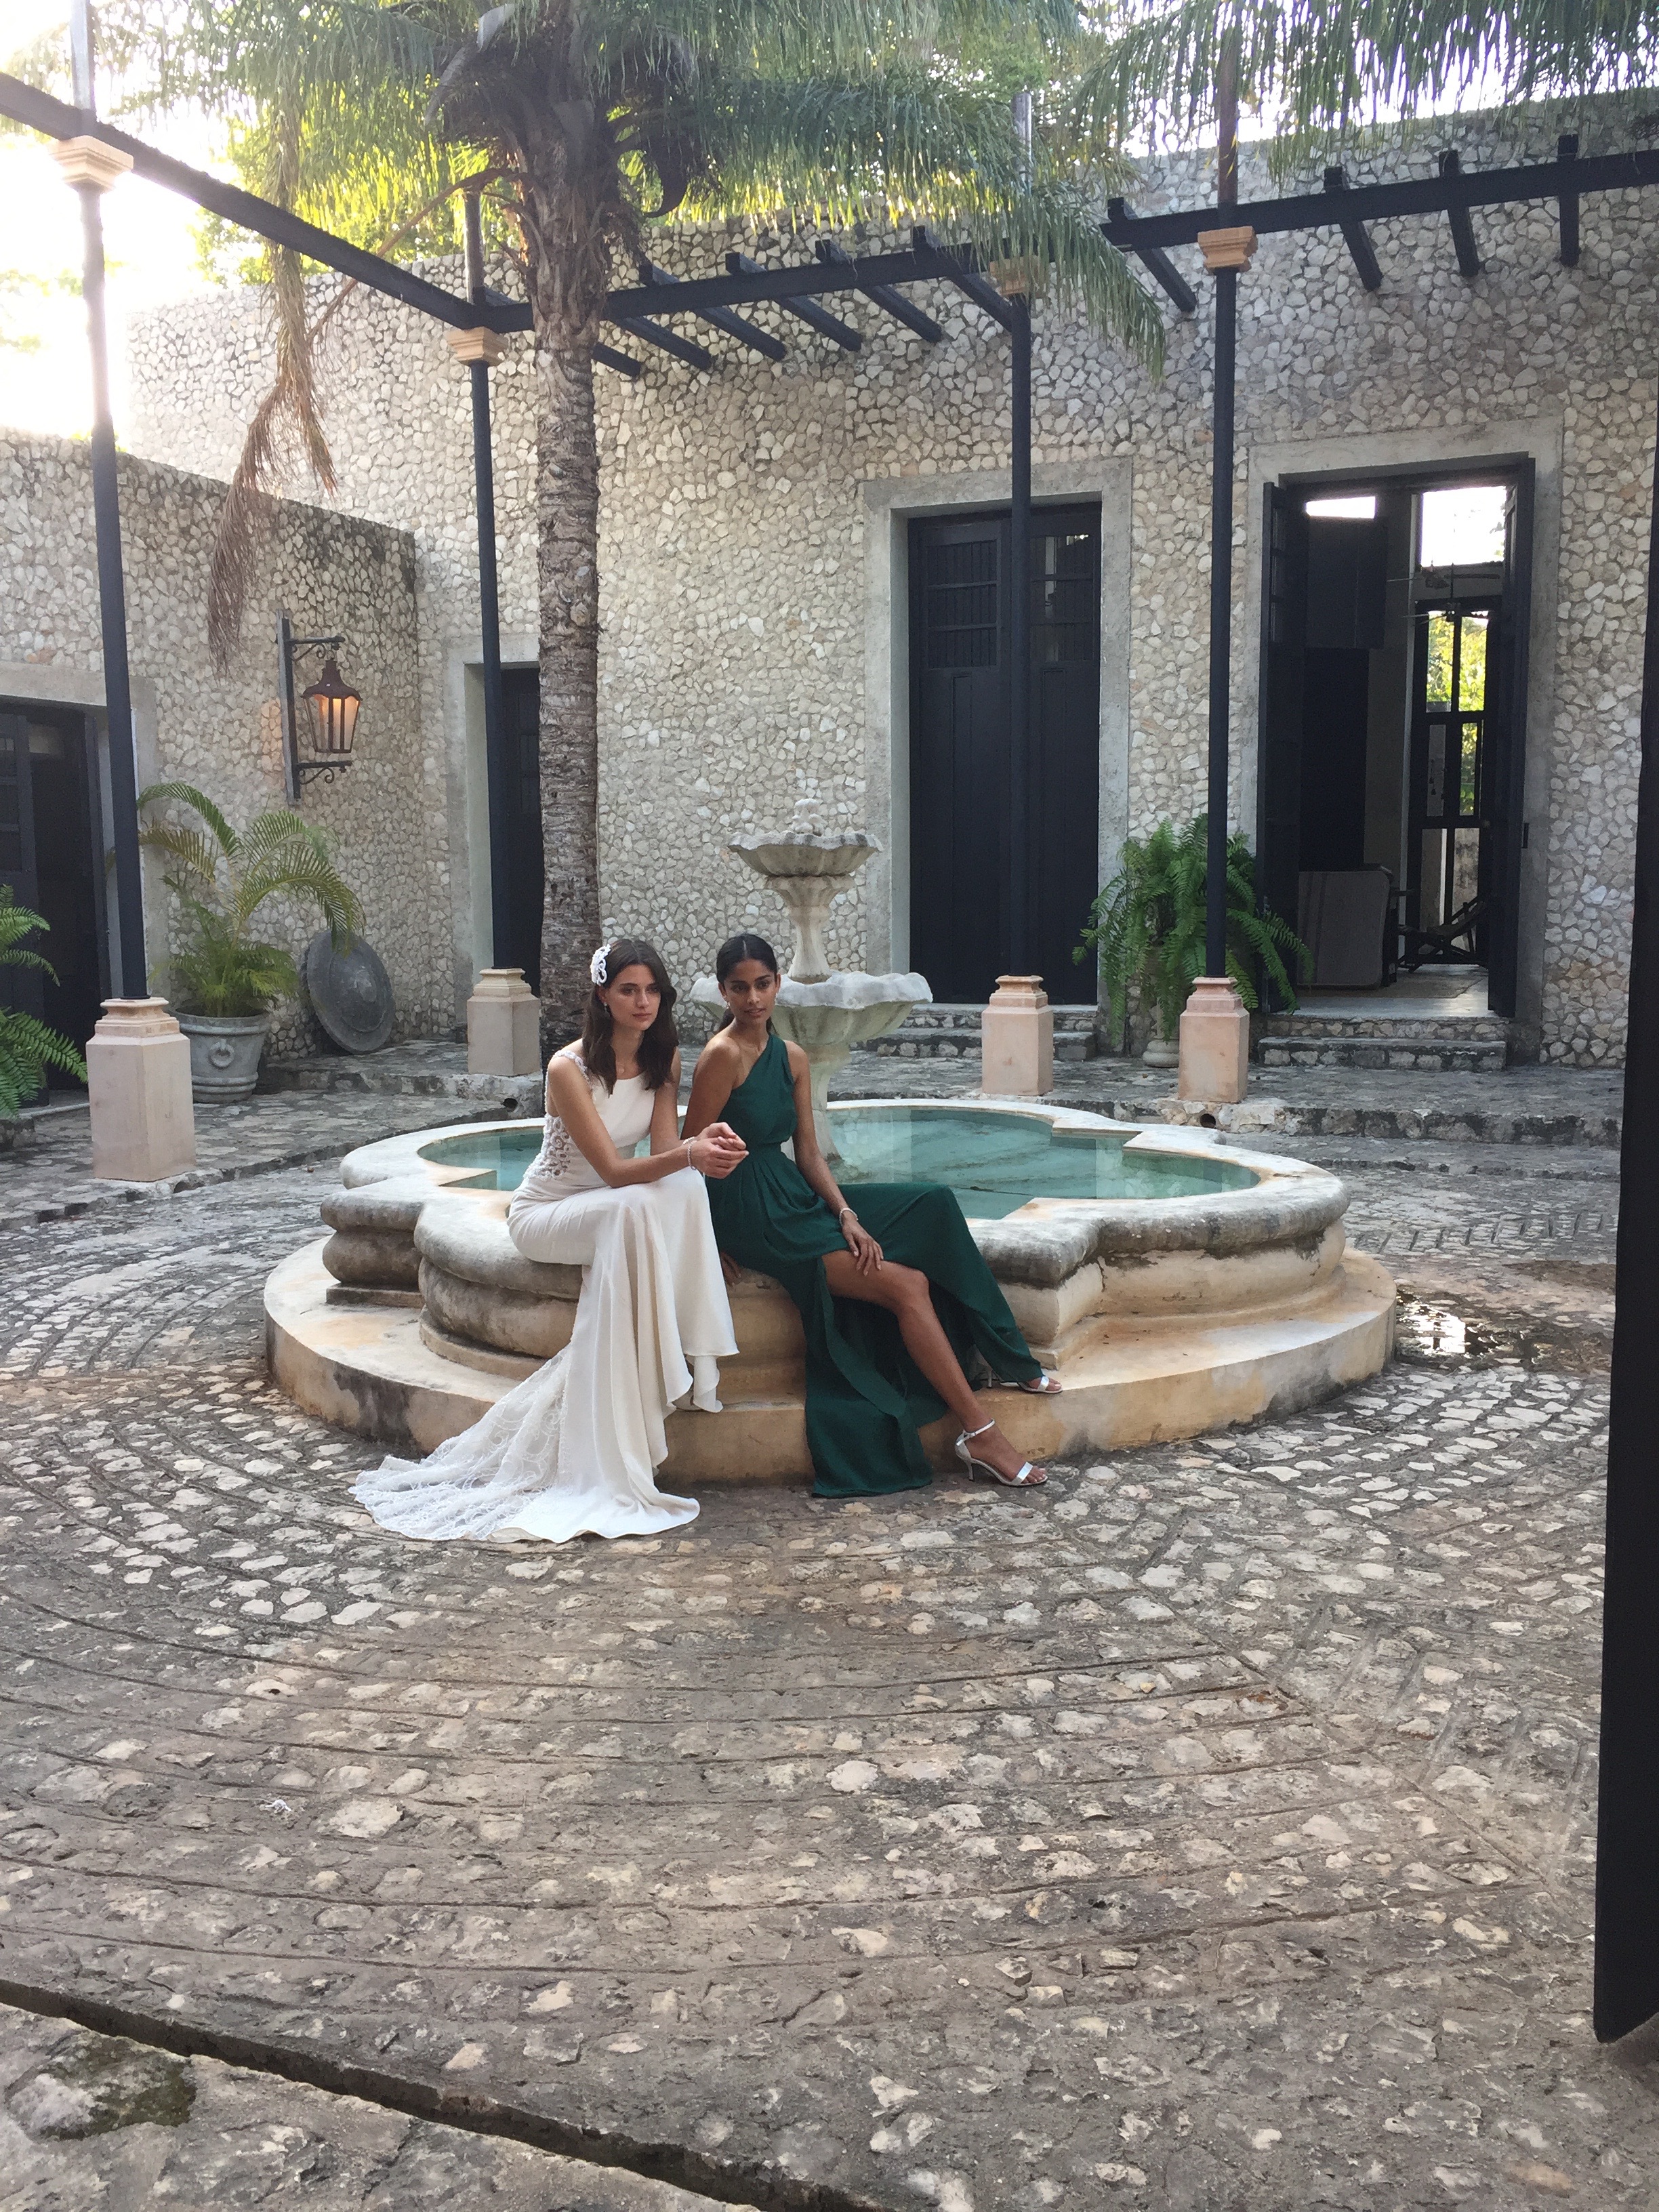 A stylish bride in Galina Signature and her bridesmaid in one of the hottest colors of the season: green. See more on The David's Bridal blog - www.davidsbridal.com/blog.